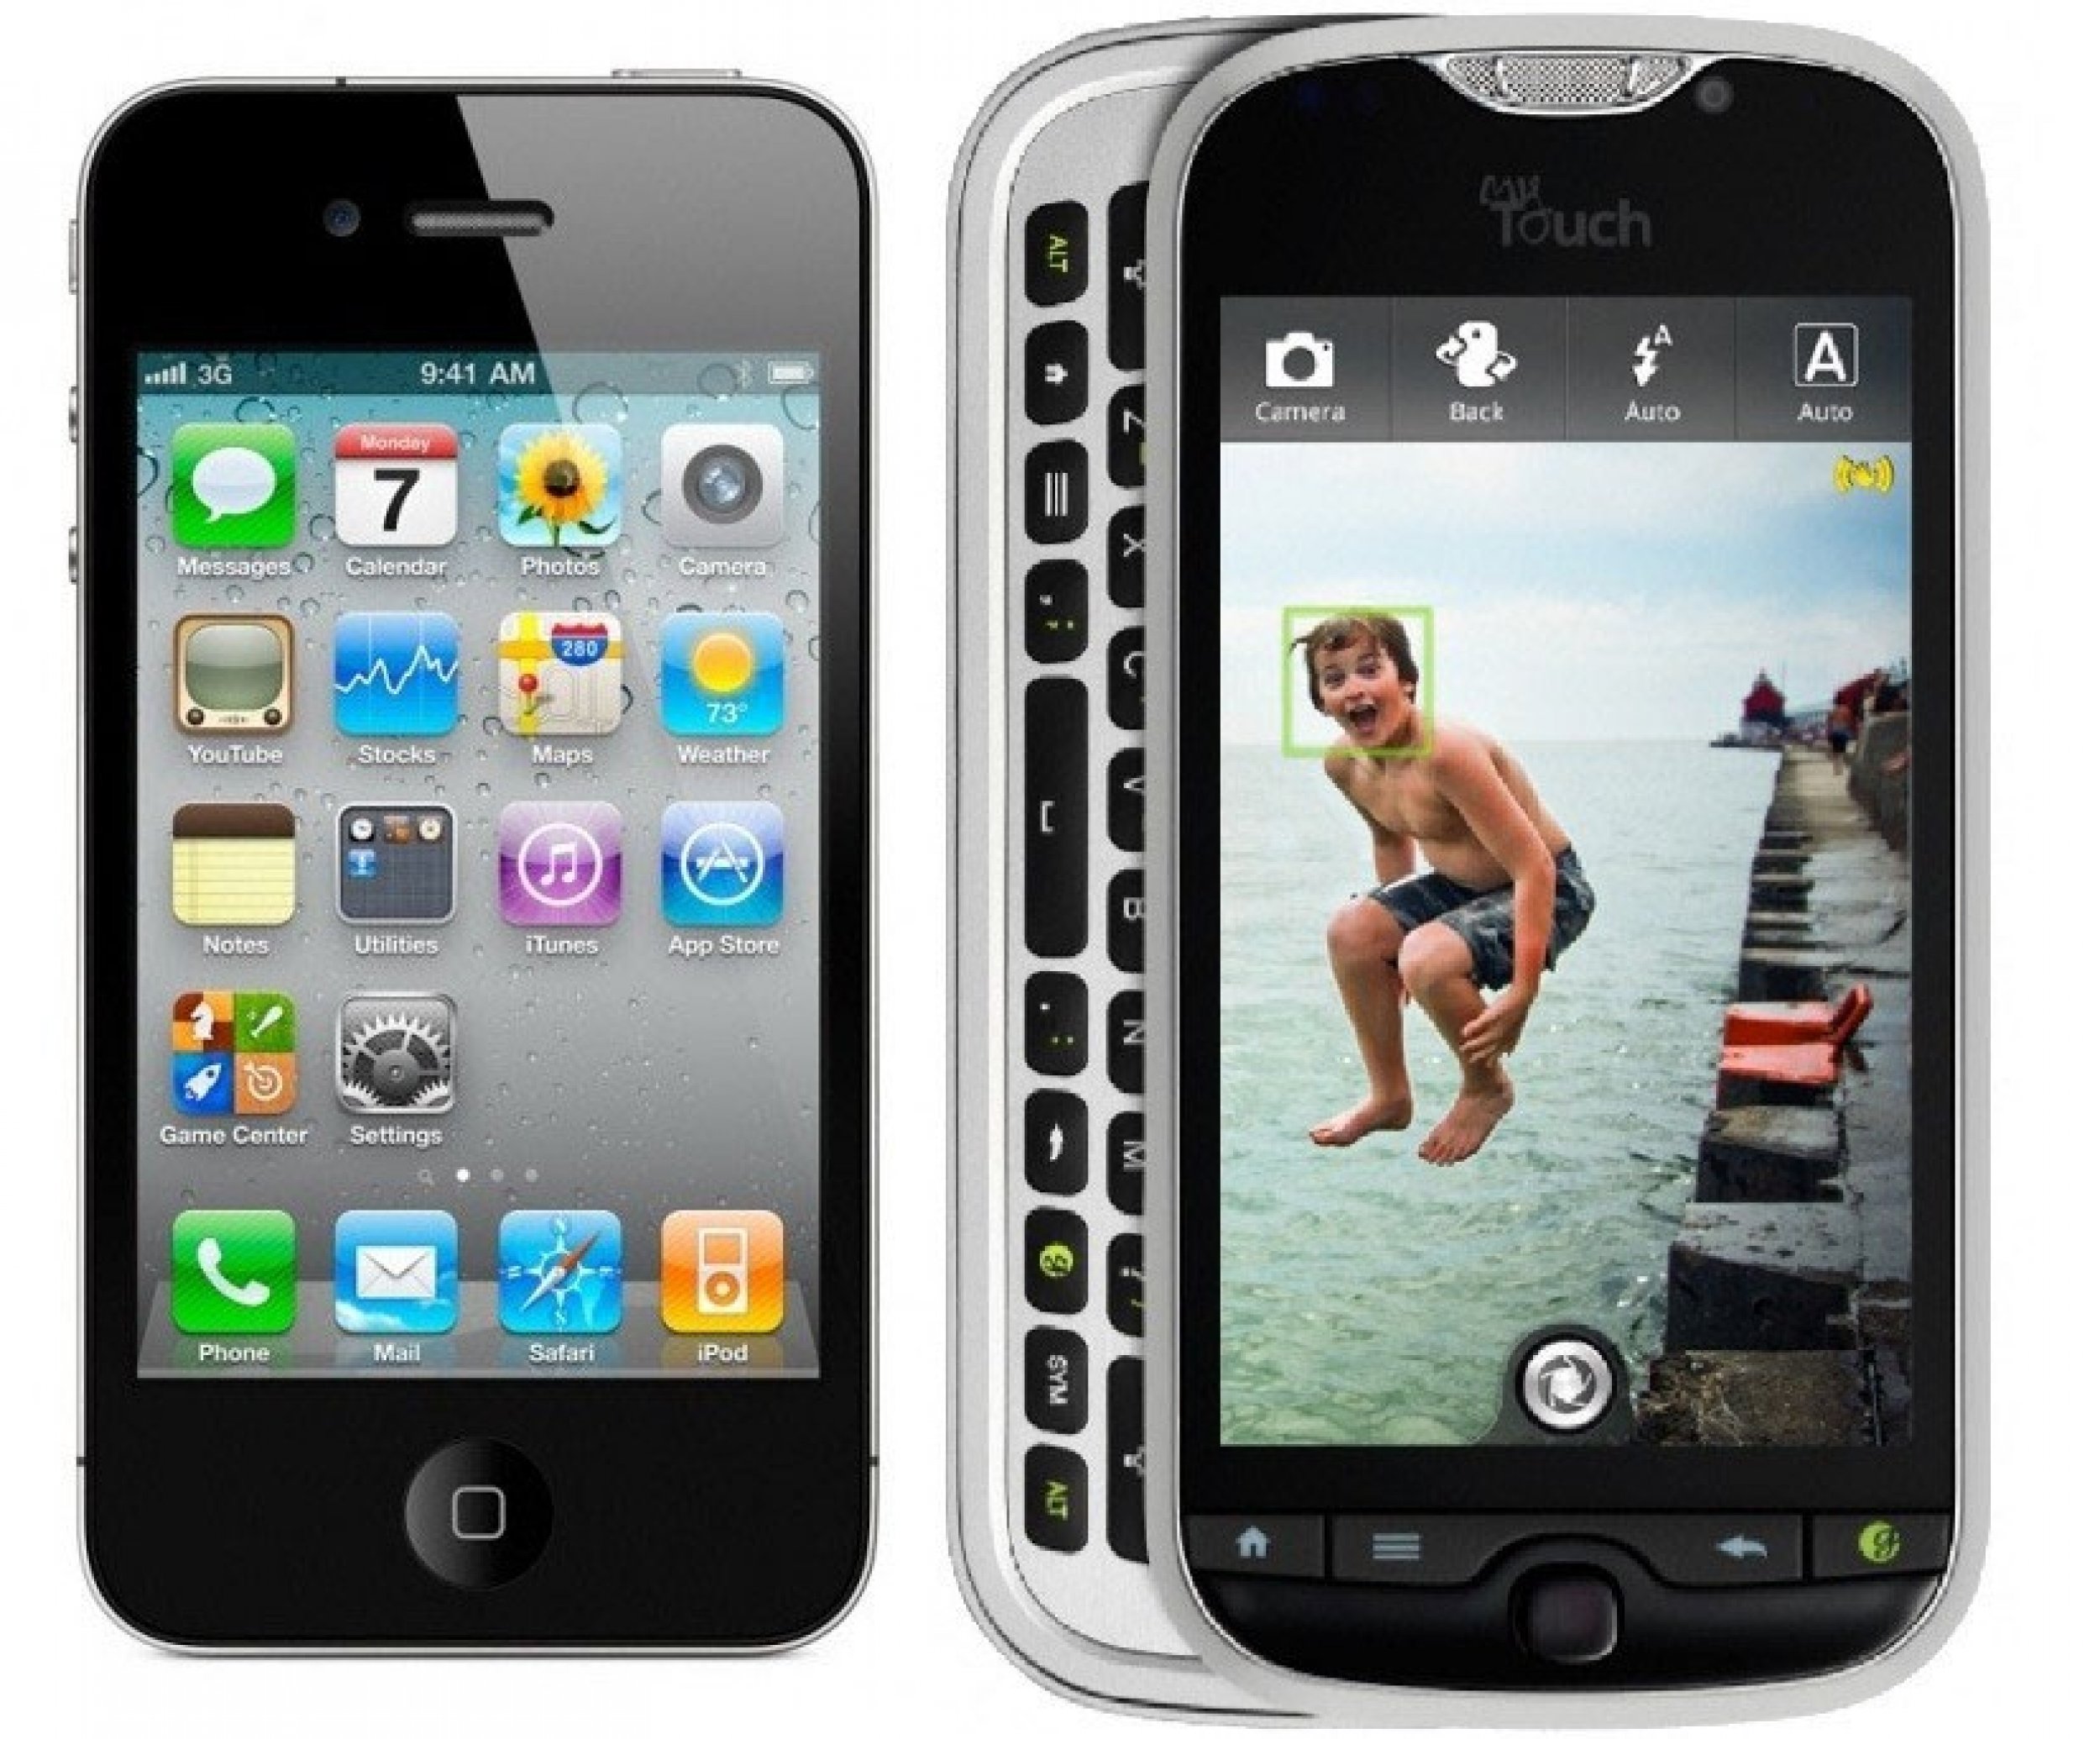 iPhone 4 left and HTC myTouch 4G Slide